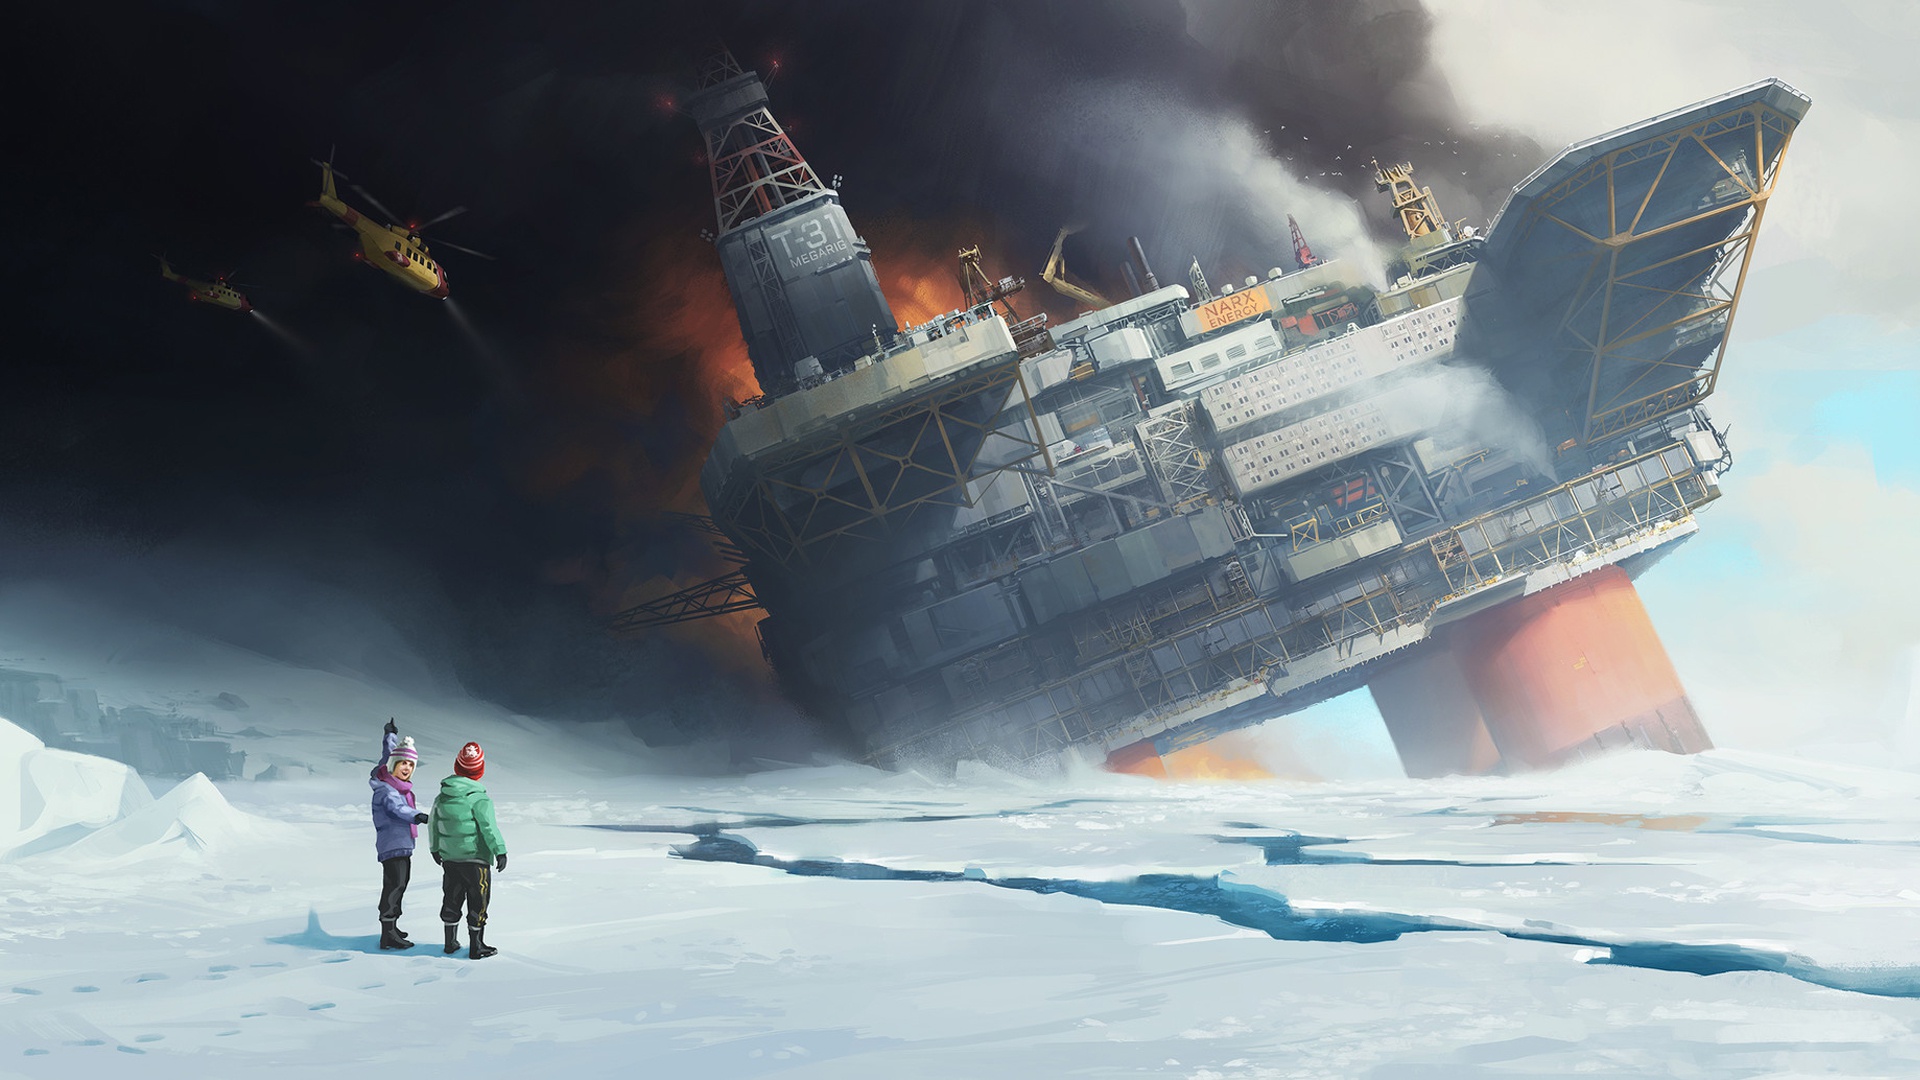 Oil Rig Artwork Fire Burning Helicopter Ice 1920x1080